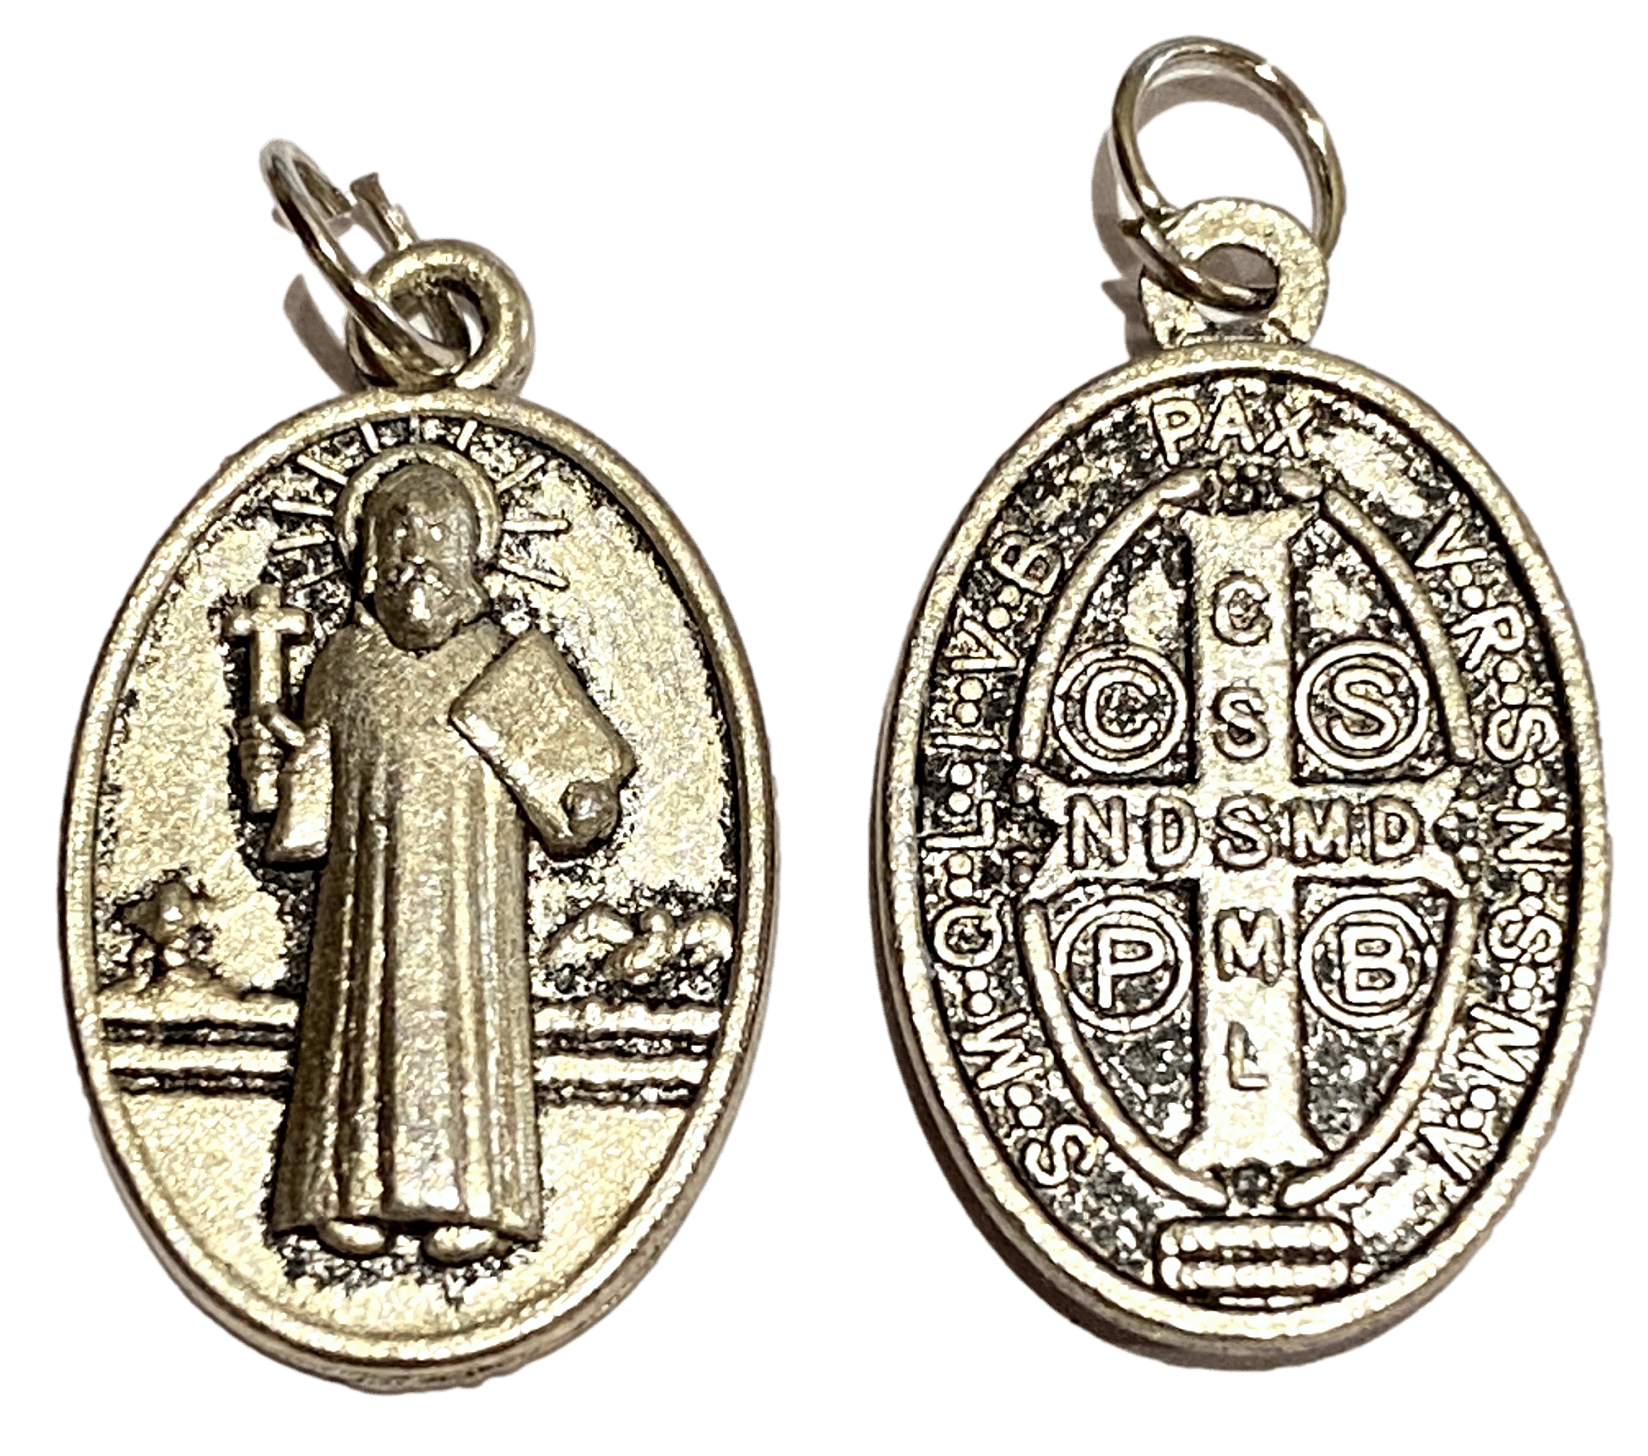 Medal Saint Benedict Medal Back Long Oval Italian Double-Sided Silver Oxidized Metal Alloy 1 inch - Ysleta Mission Gift Shop- VOTED El Paso's Best Gift Shop